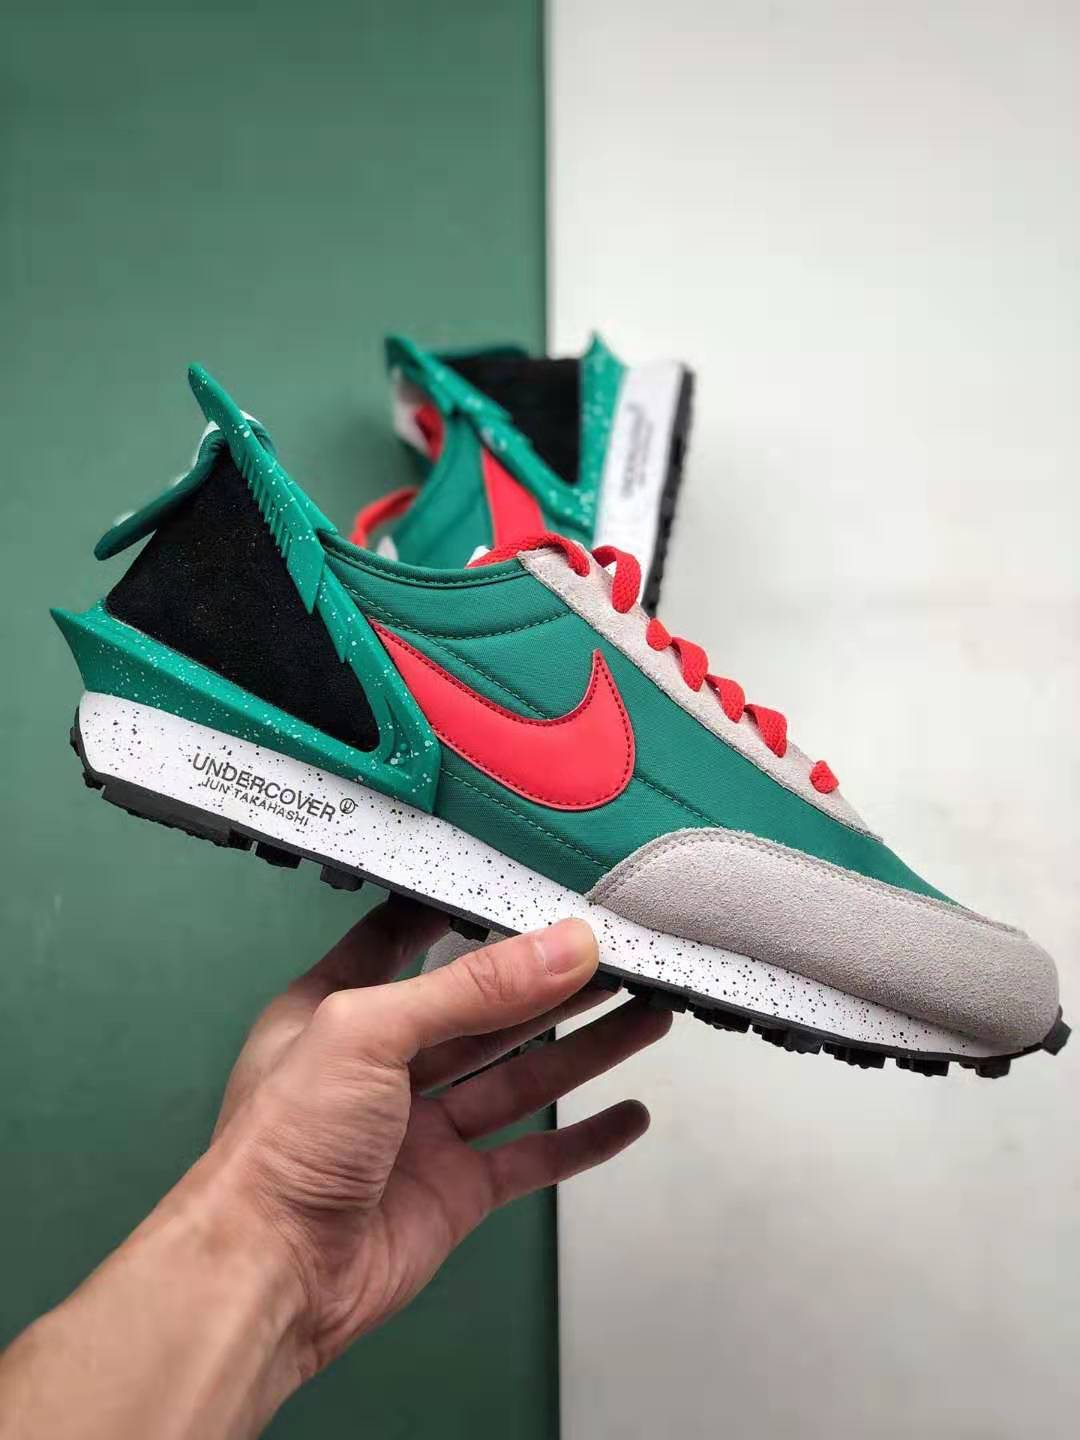 Undercover x Nike Waffle Racer Grass Green Grey Red AA6853 006 - Limited Edition Footwear